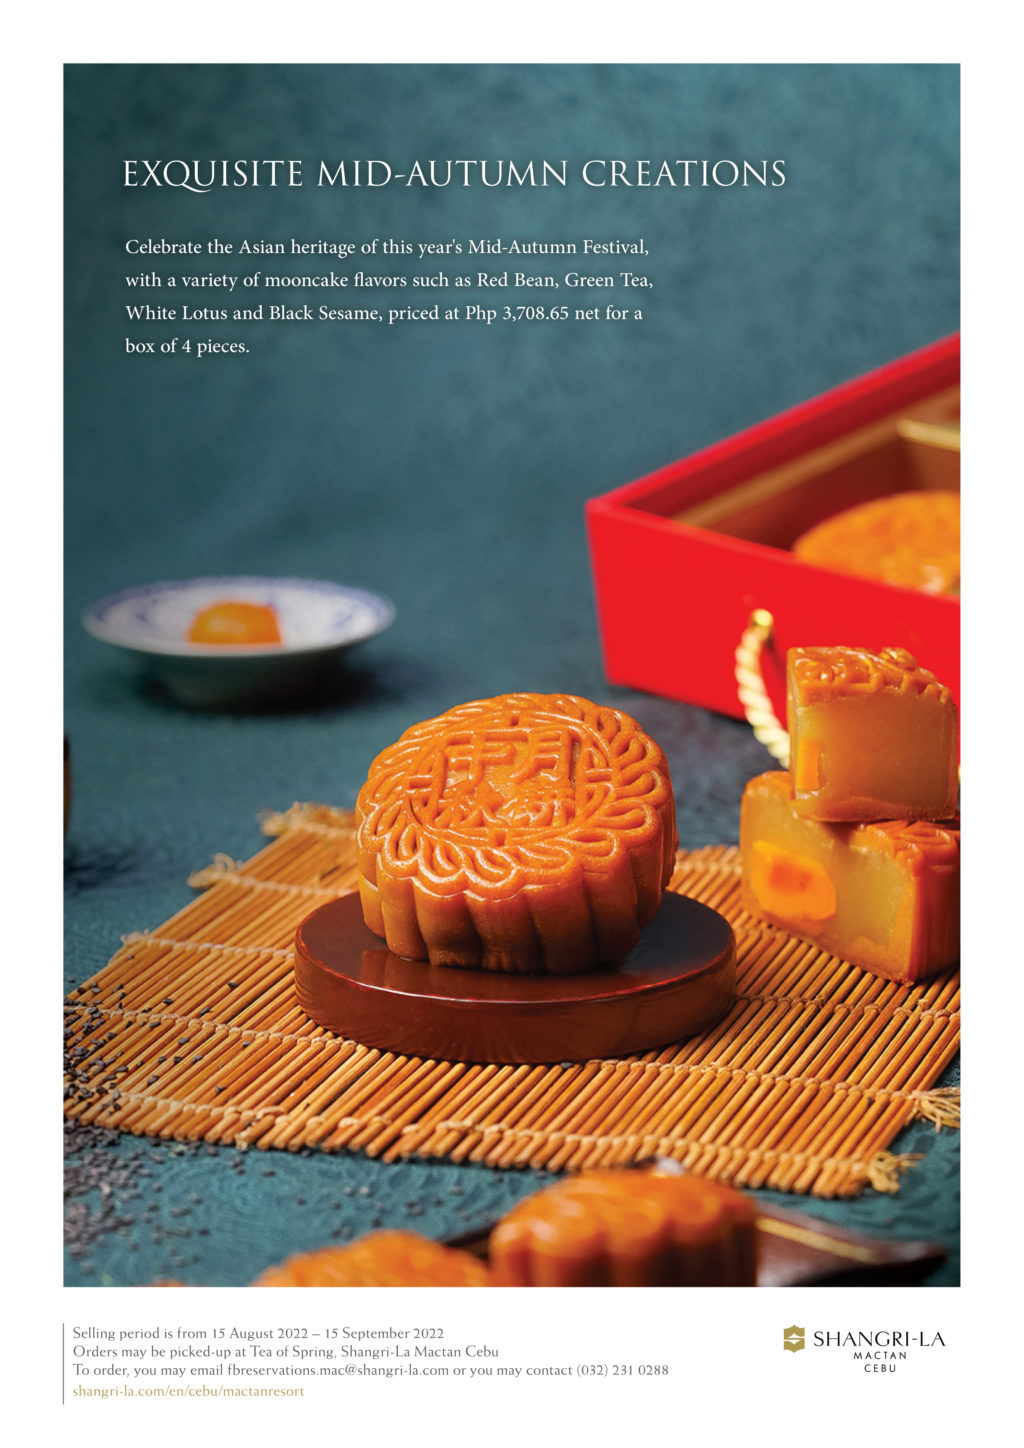 Here Are This Year's Most Luxurious Mooncakes for Mid-Autumn Festival